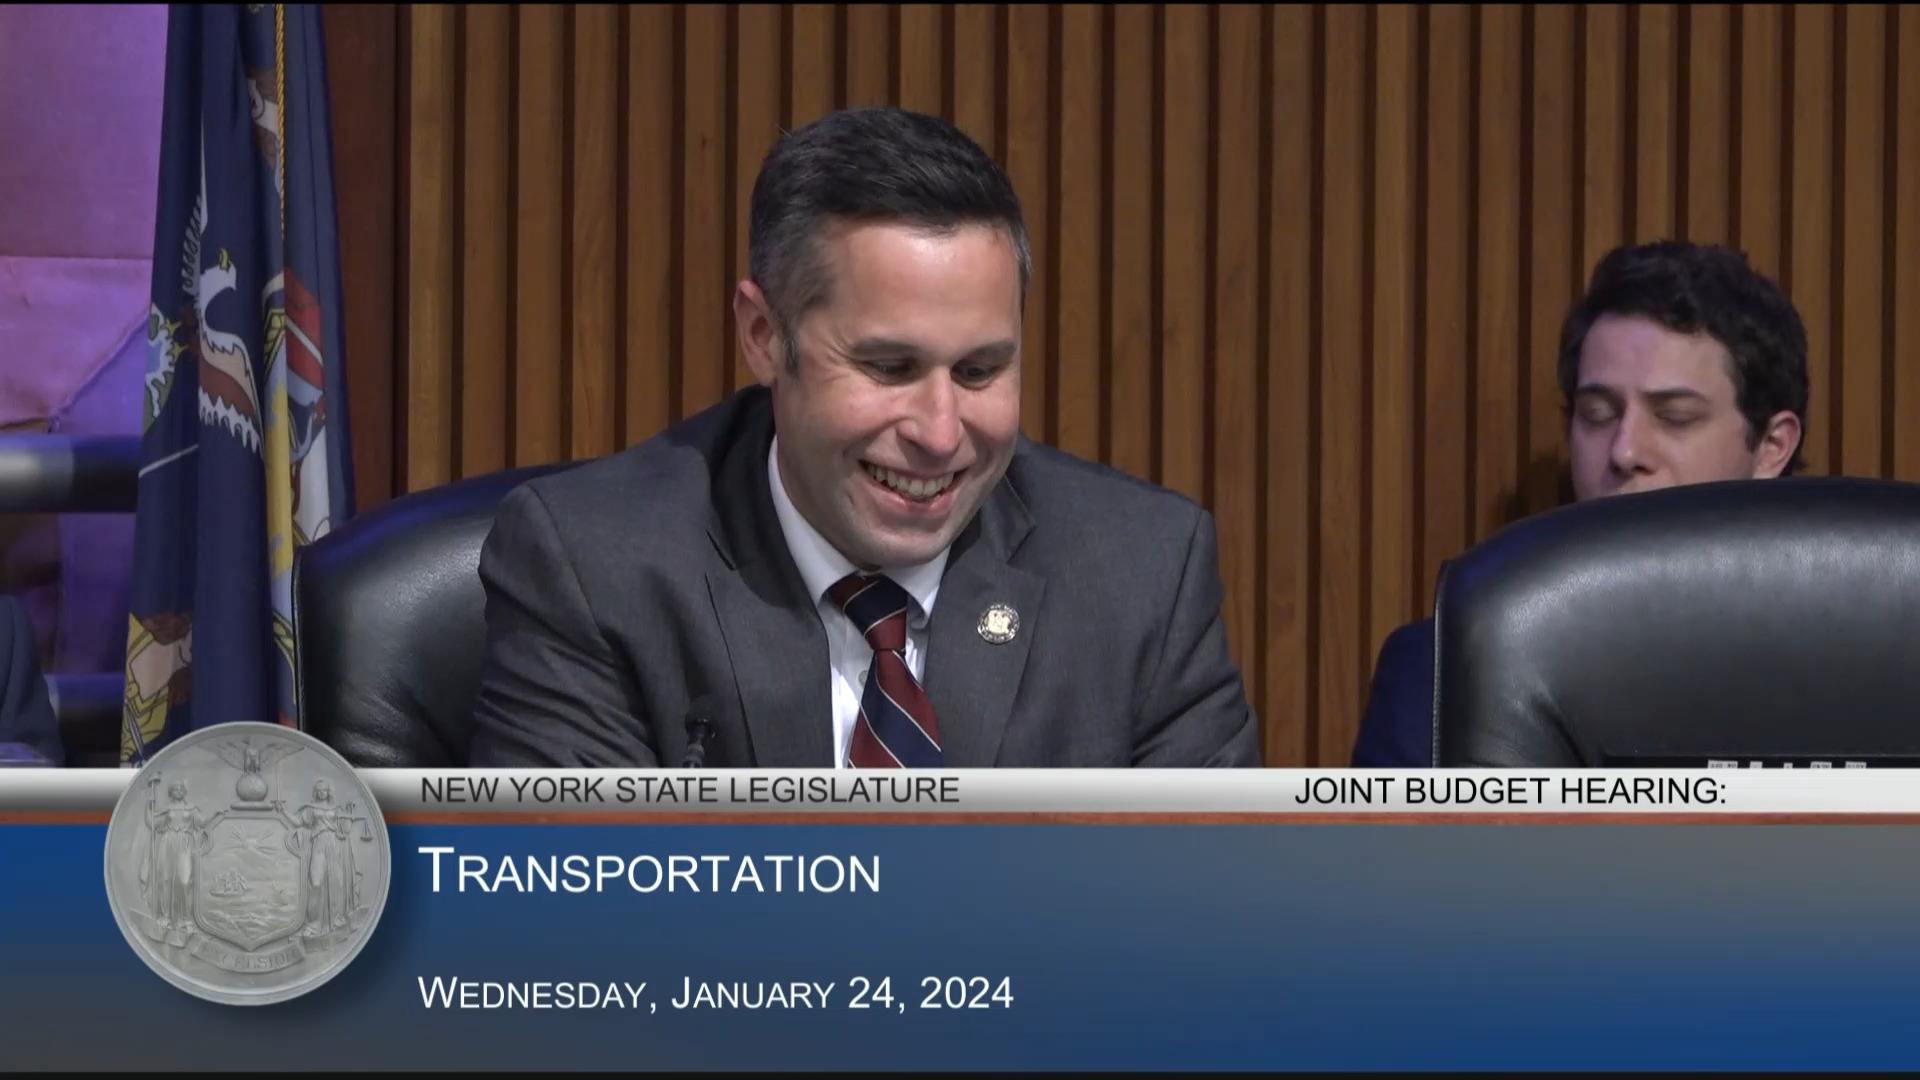 Thruway Authority Director Testifies During a Joint Budget Hearing on Transportation